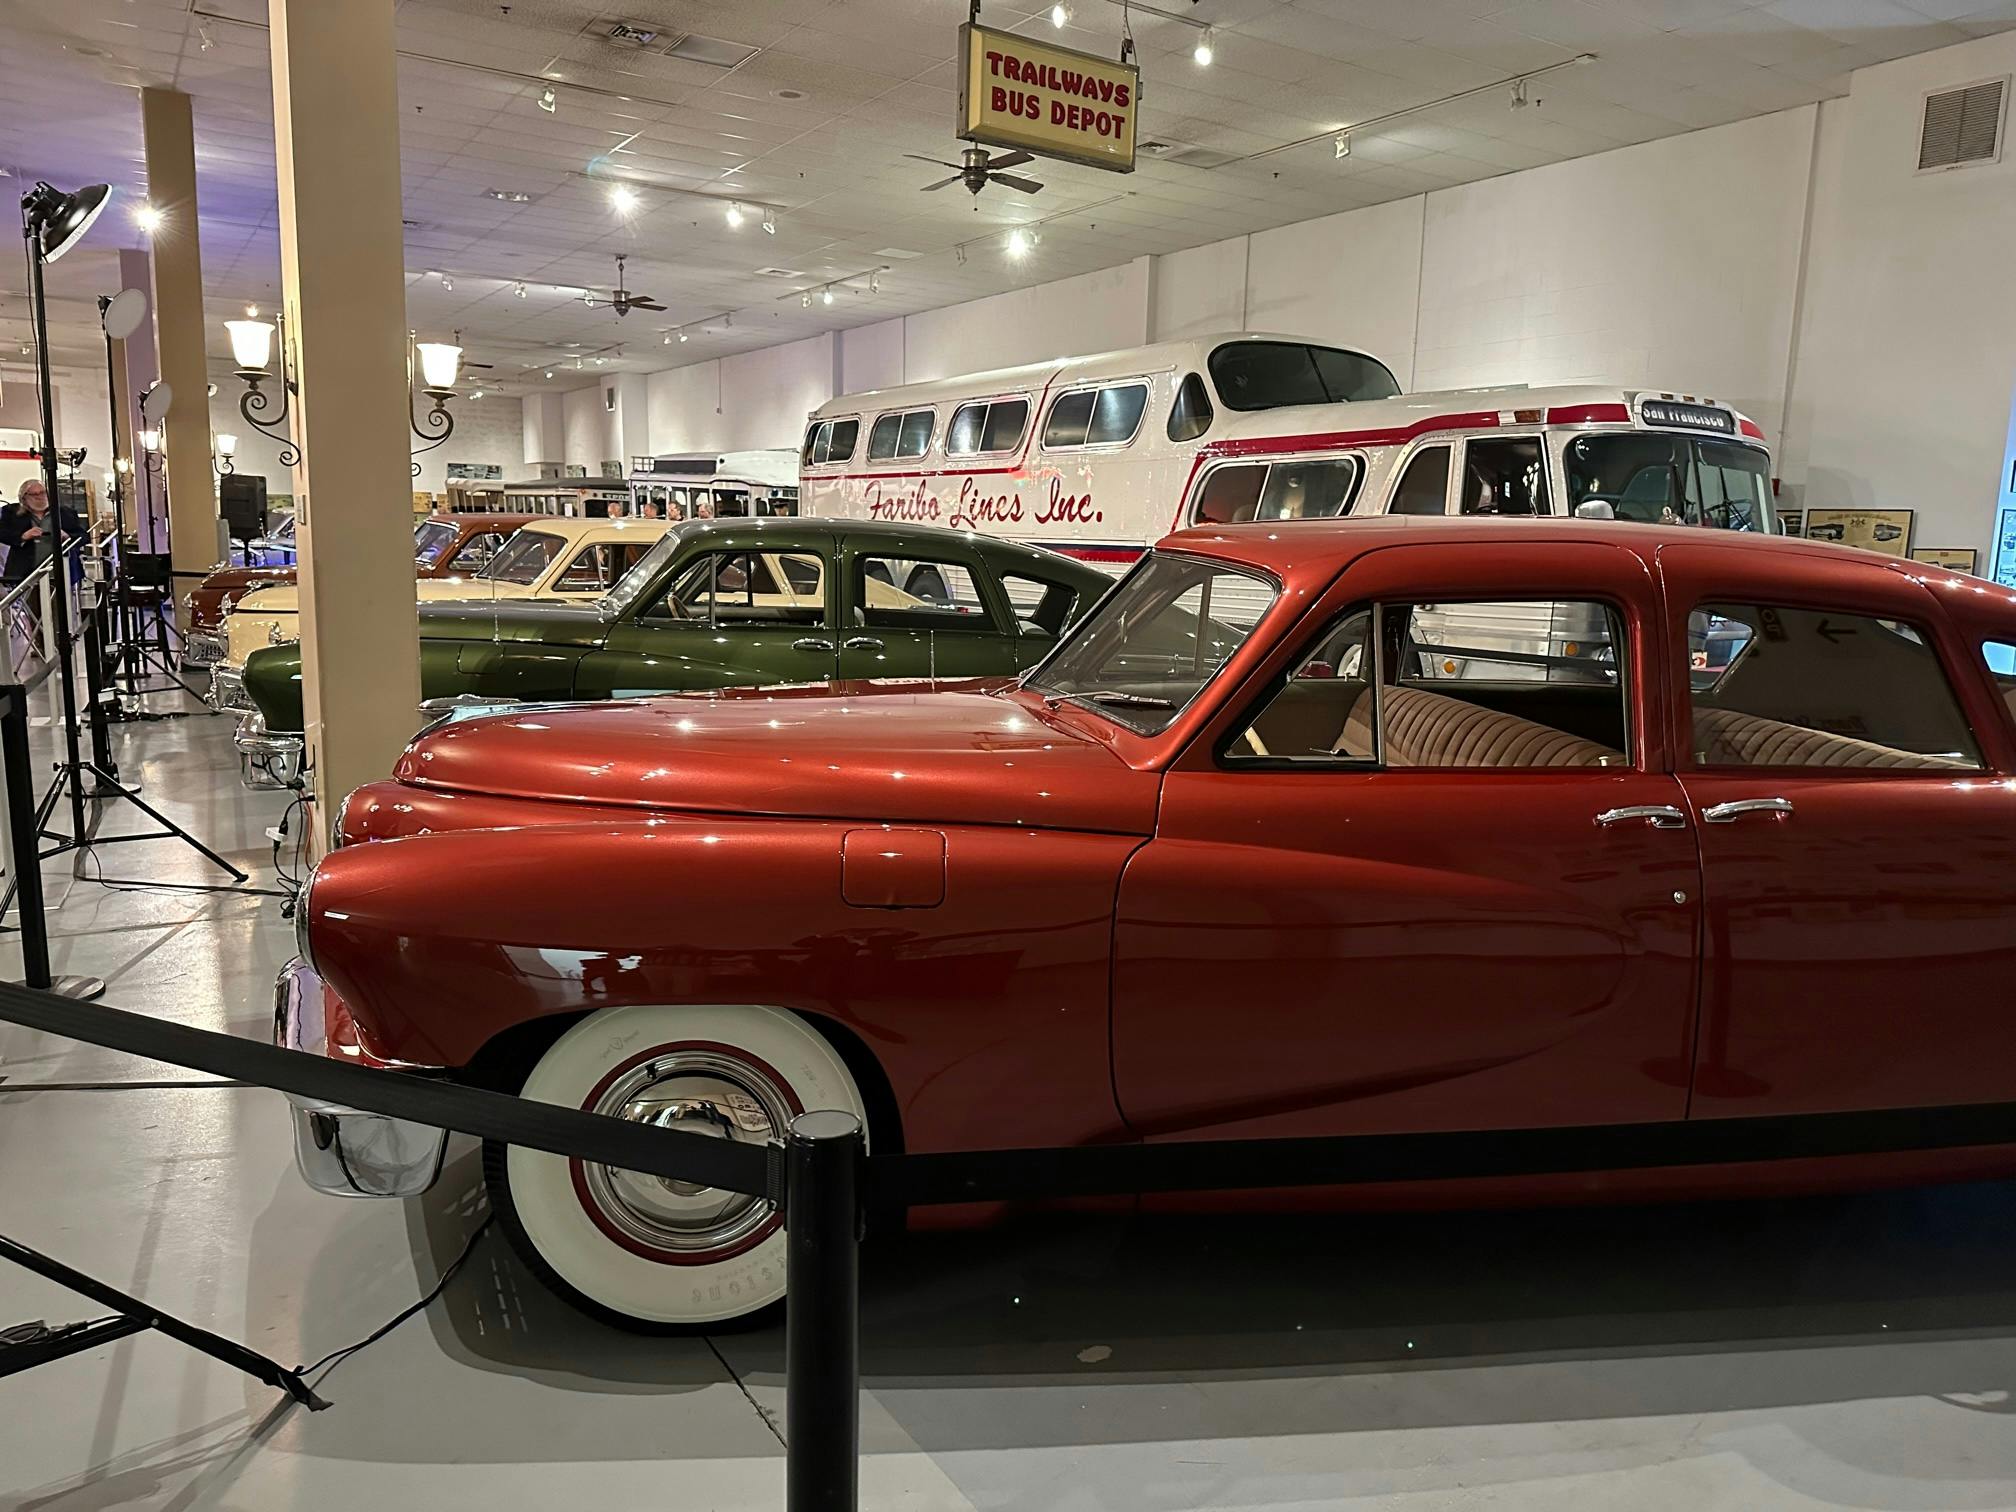 Intricacies of the Tucker story 75 years later - Old Cars Weekly